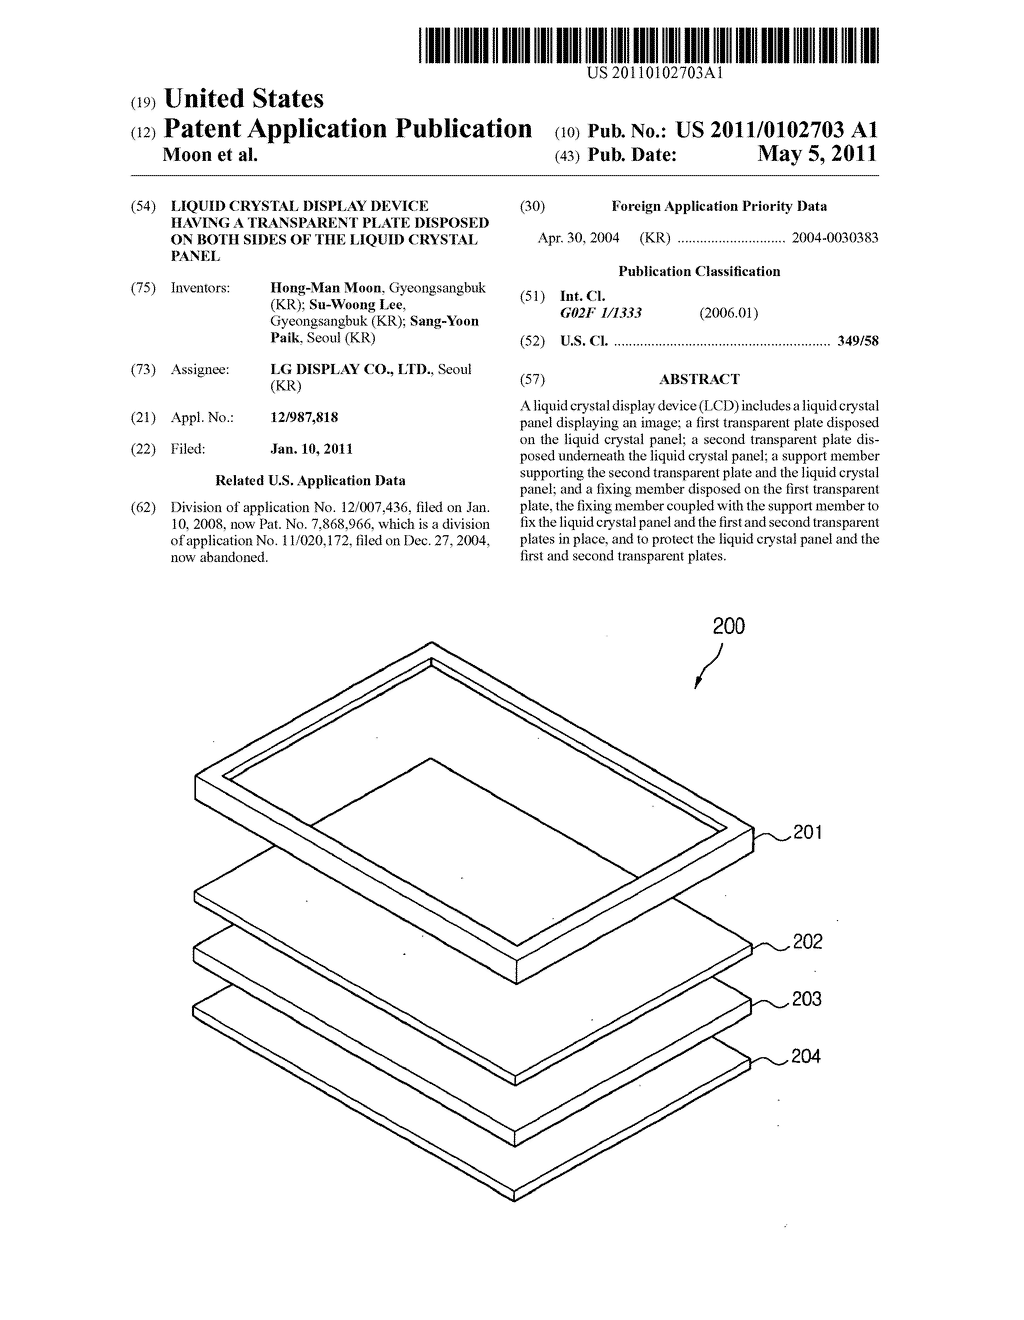 LIQUID CRYSTAL DISPLAY DEVICE HAVING A TRANSPARENT PLATE DISPOSED ON BOTH SIDES OF THE LIQUID CRYSTAL PANEL - diagram, schematic, and image 01